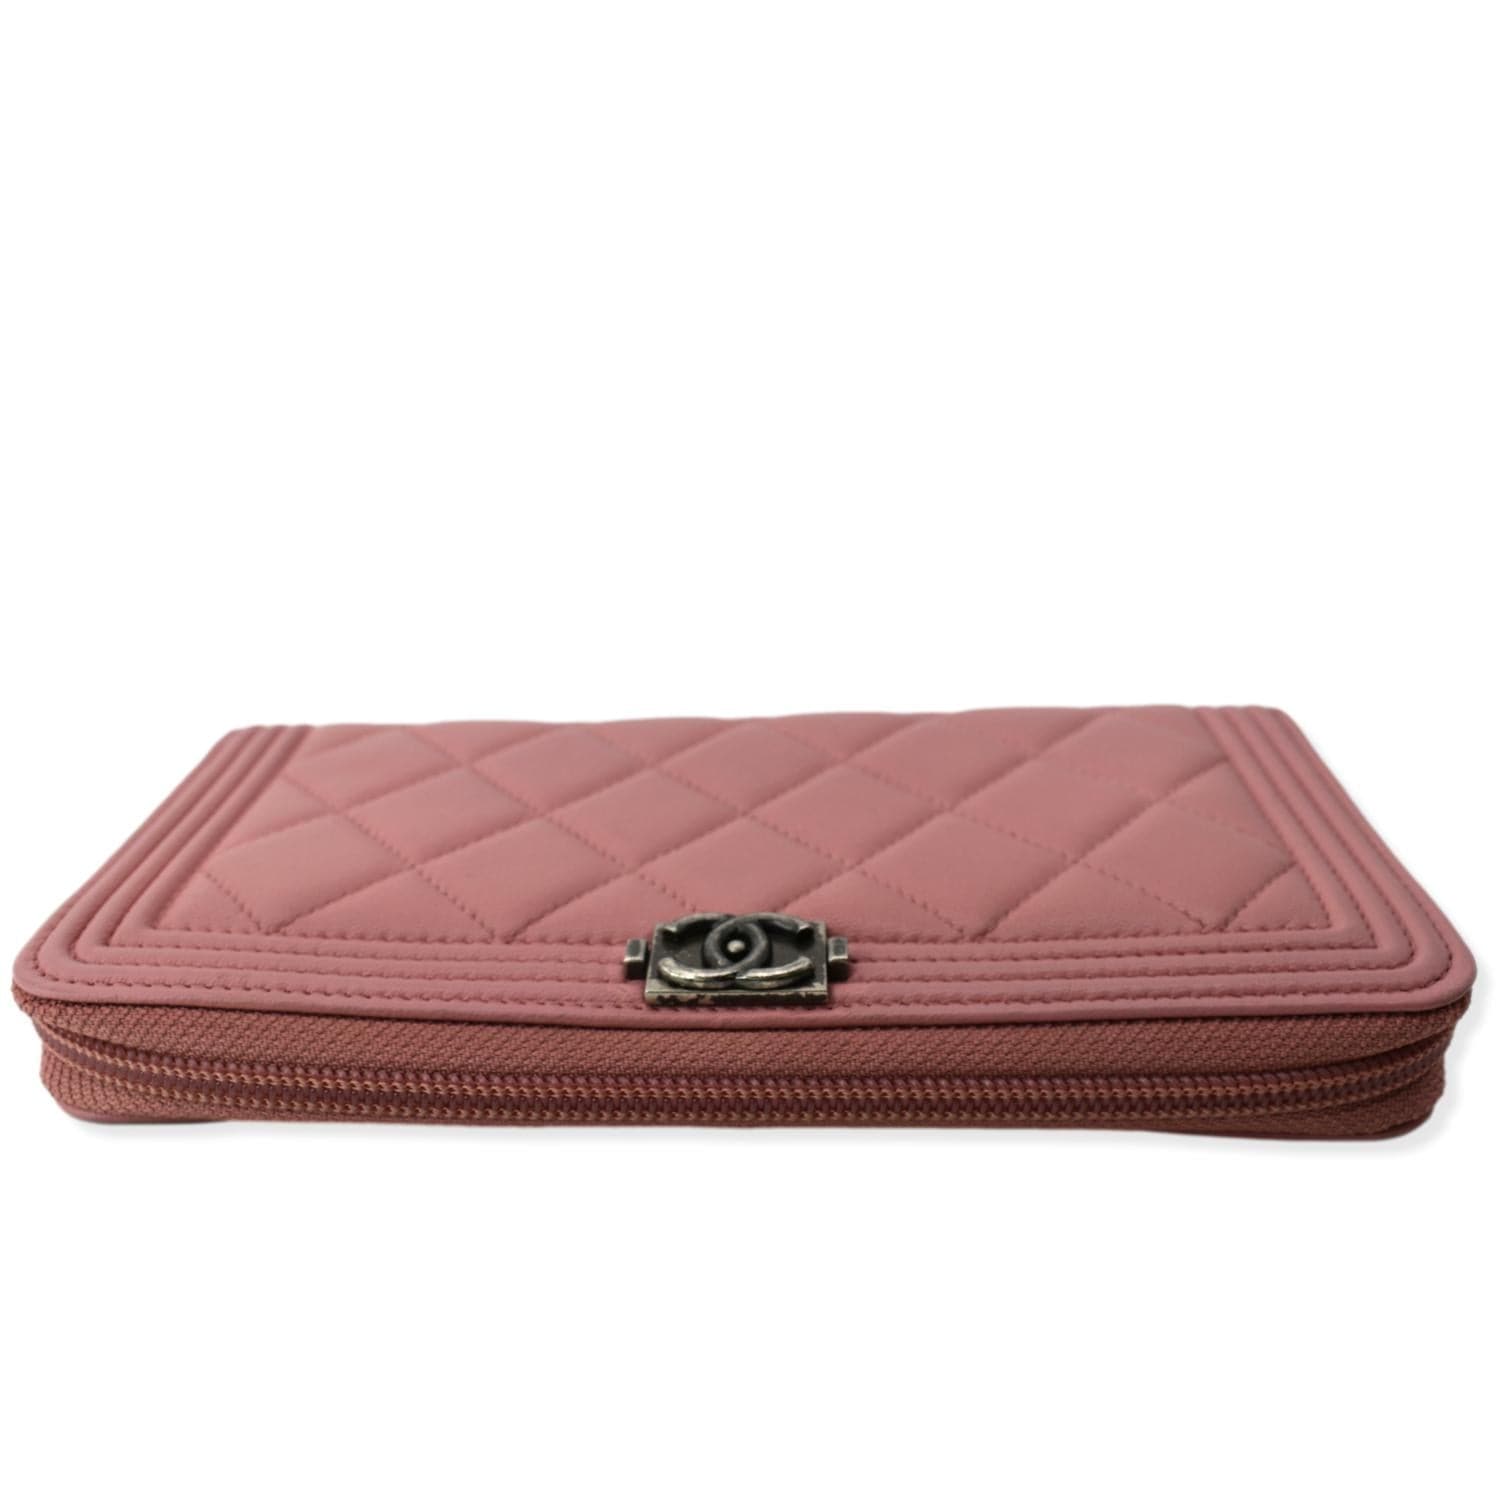 Chanel Small Boy Caviar Leather Zip Around Wallet Pink